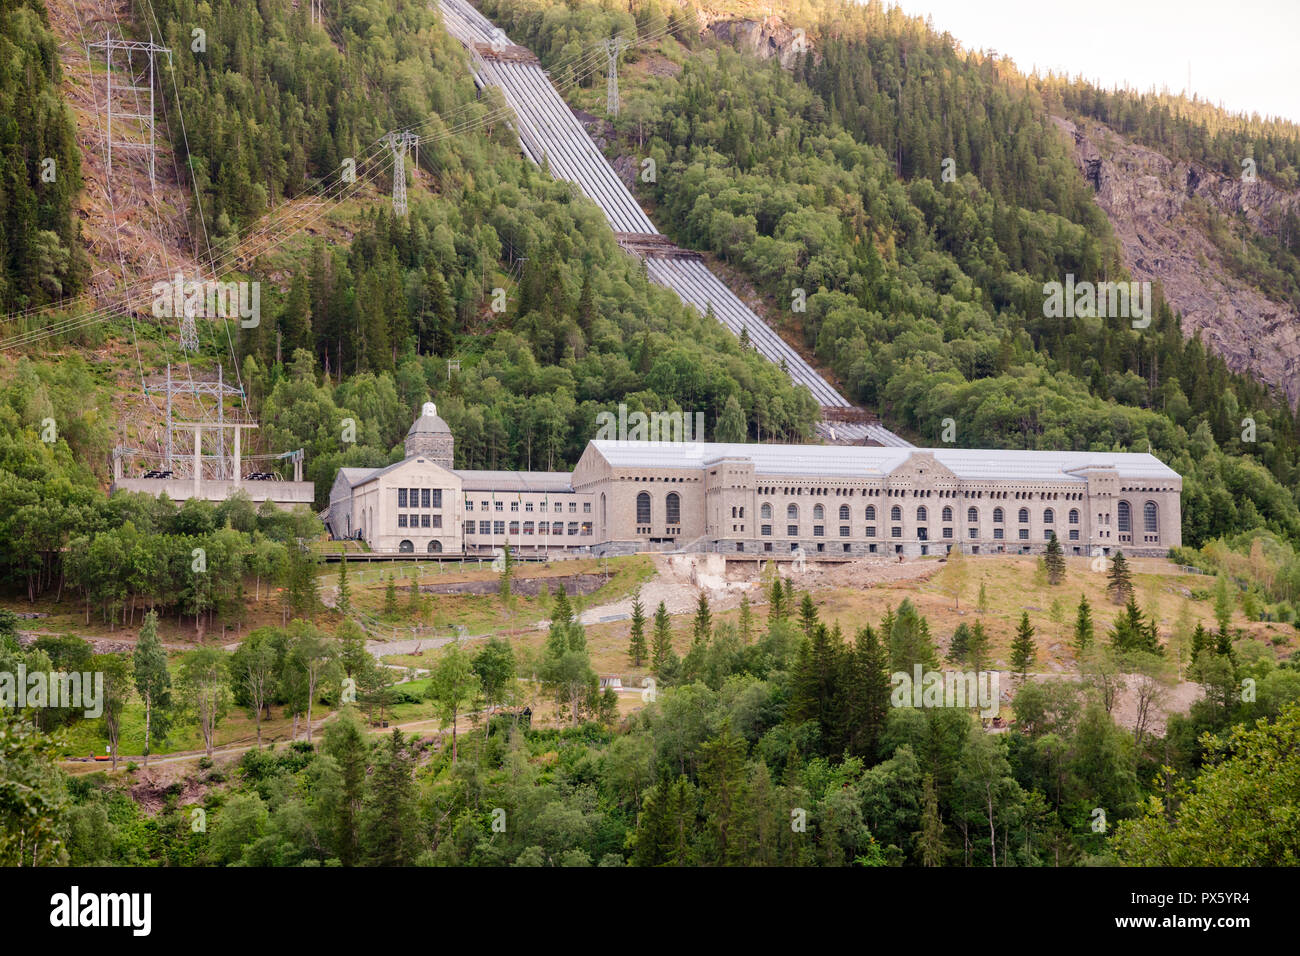 Vemork Hydroelectric Power Station at Rjukan, a part of Rjukan-Notodden UNESCO Industrial Heritage Site, known for Norwegian heavy water sabotage Stock Photo